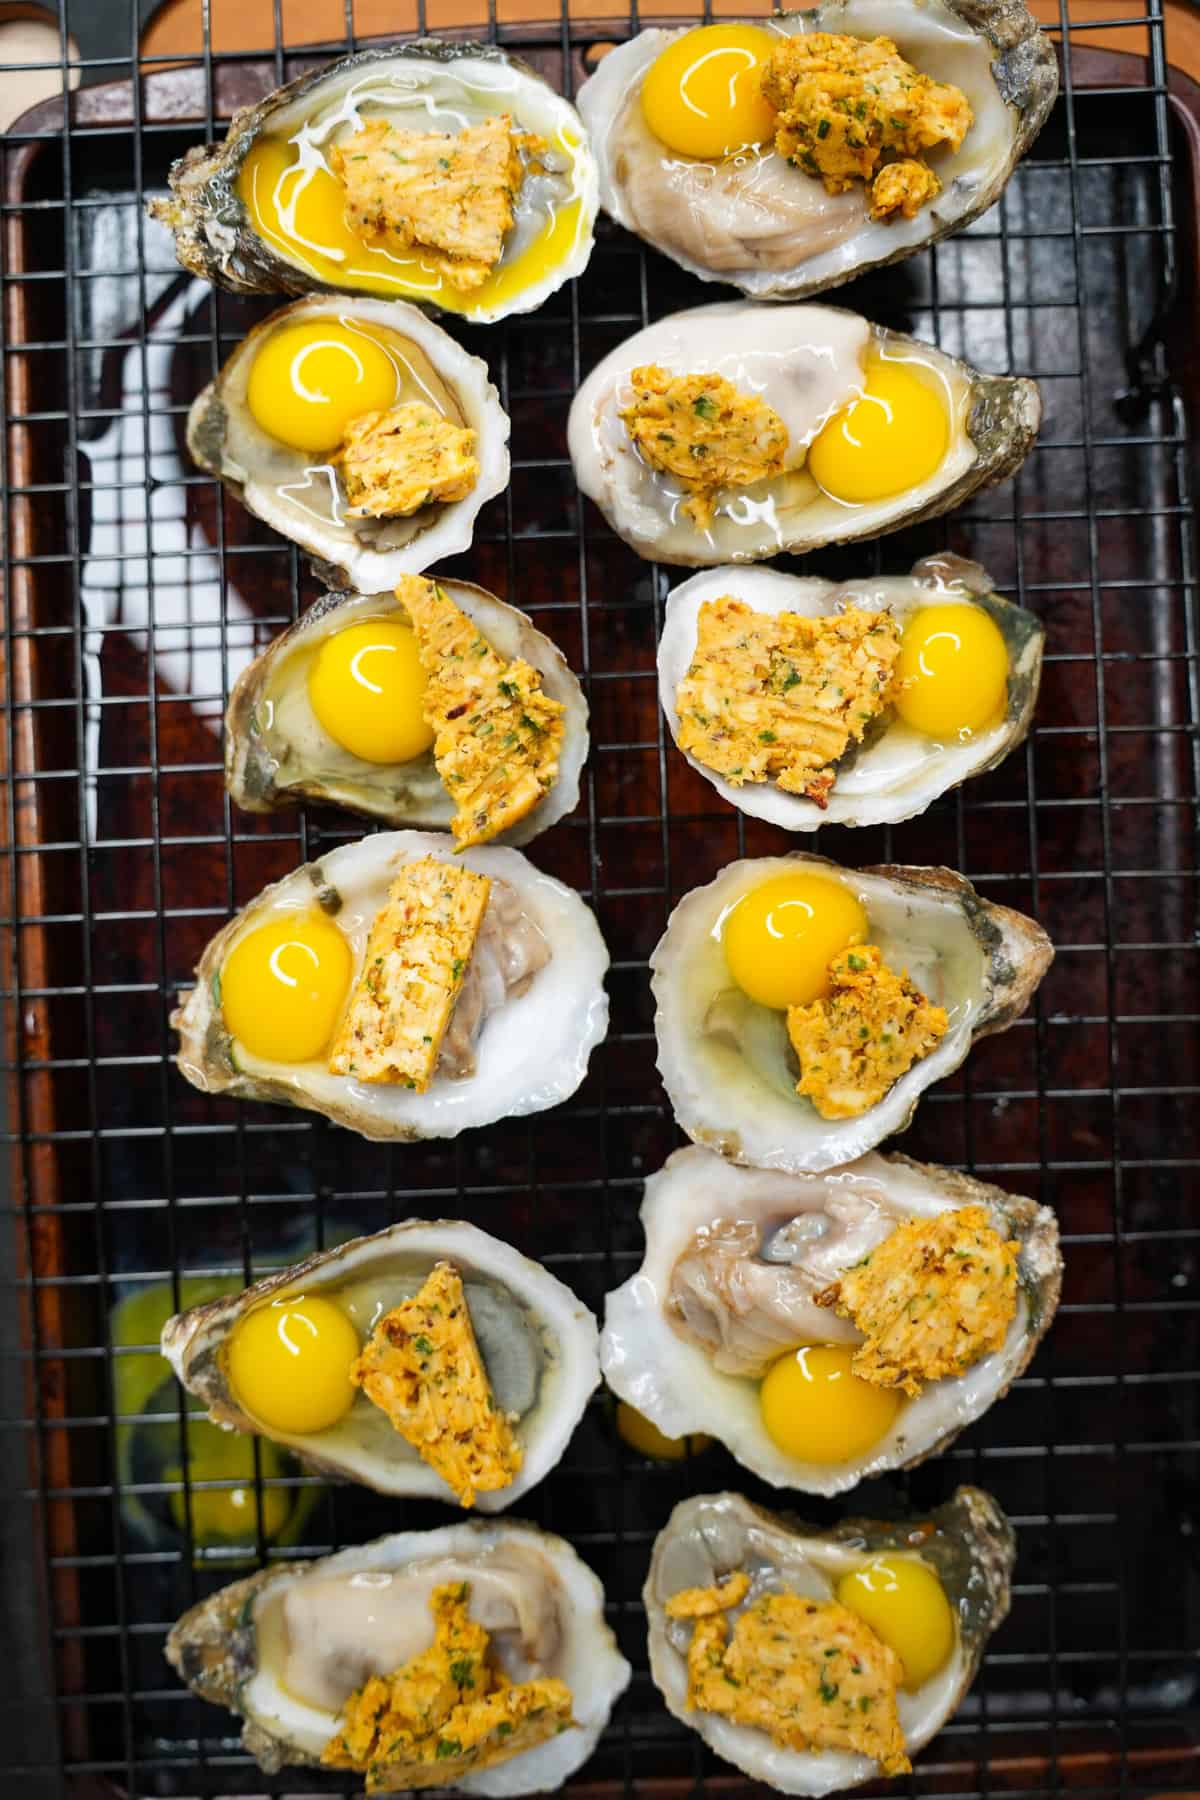 The oysters topped with compound butter and quail eggs.